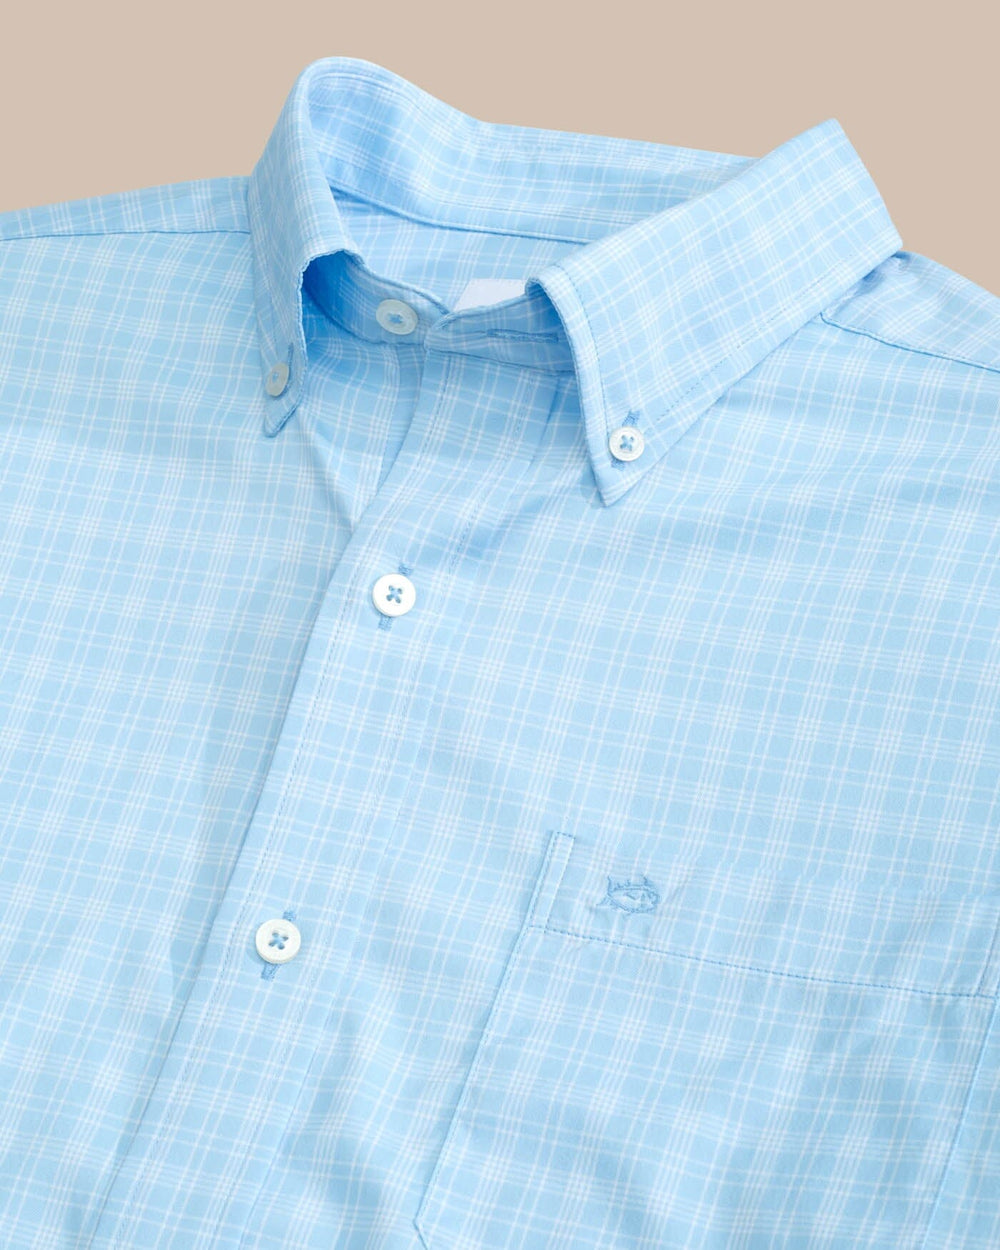 The detail view of the Southern Tide brrr Intercoastal Pettigru Plaid Long Sleeve SportShirt by Southern Tide - Clearwater Blue